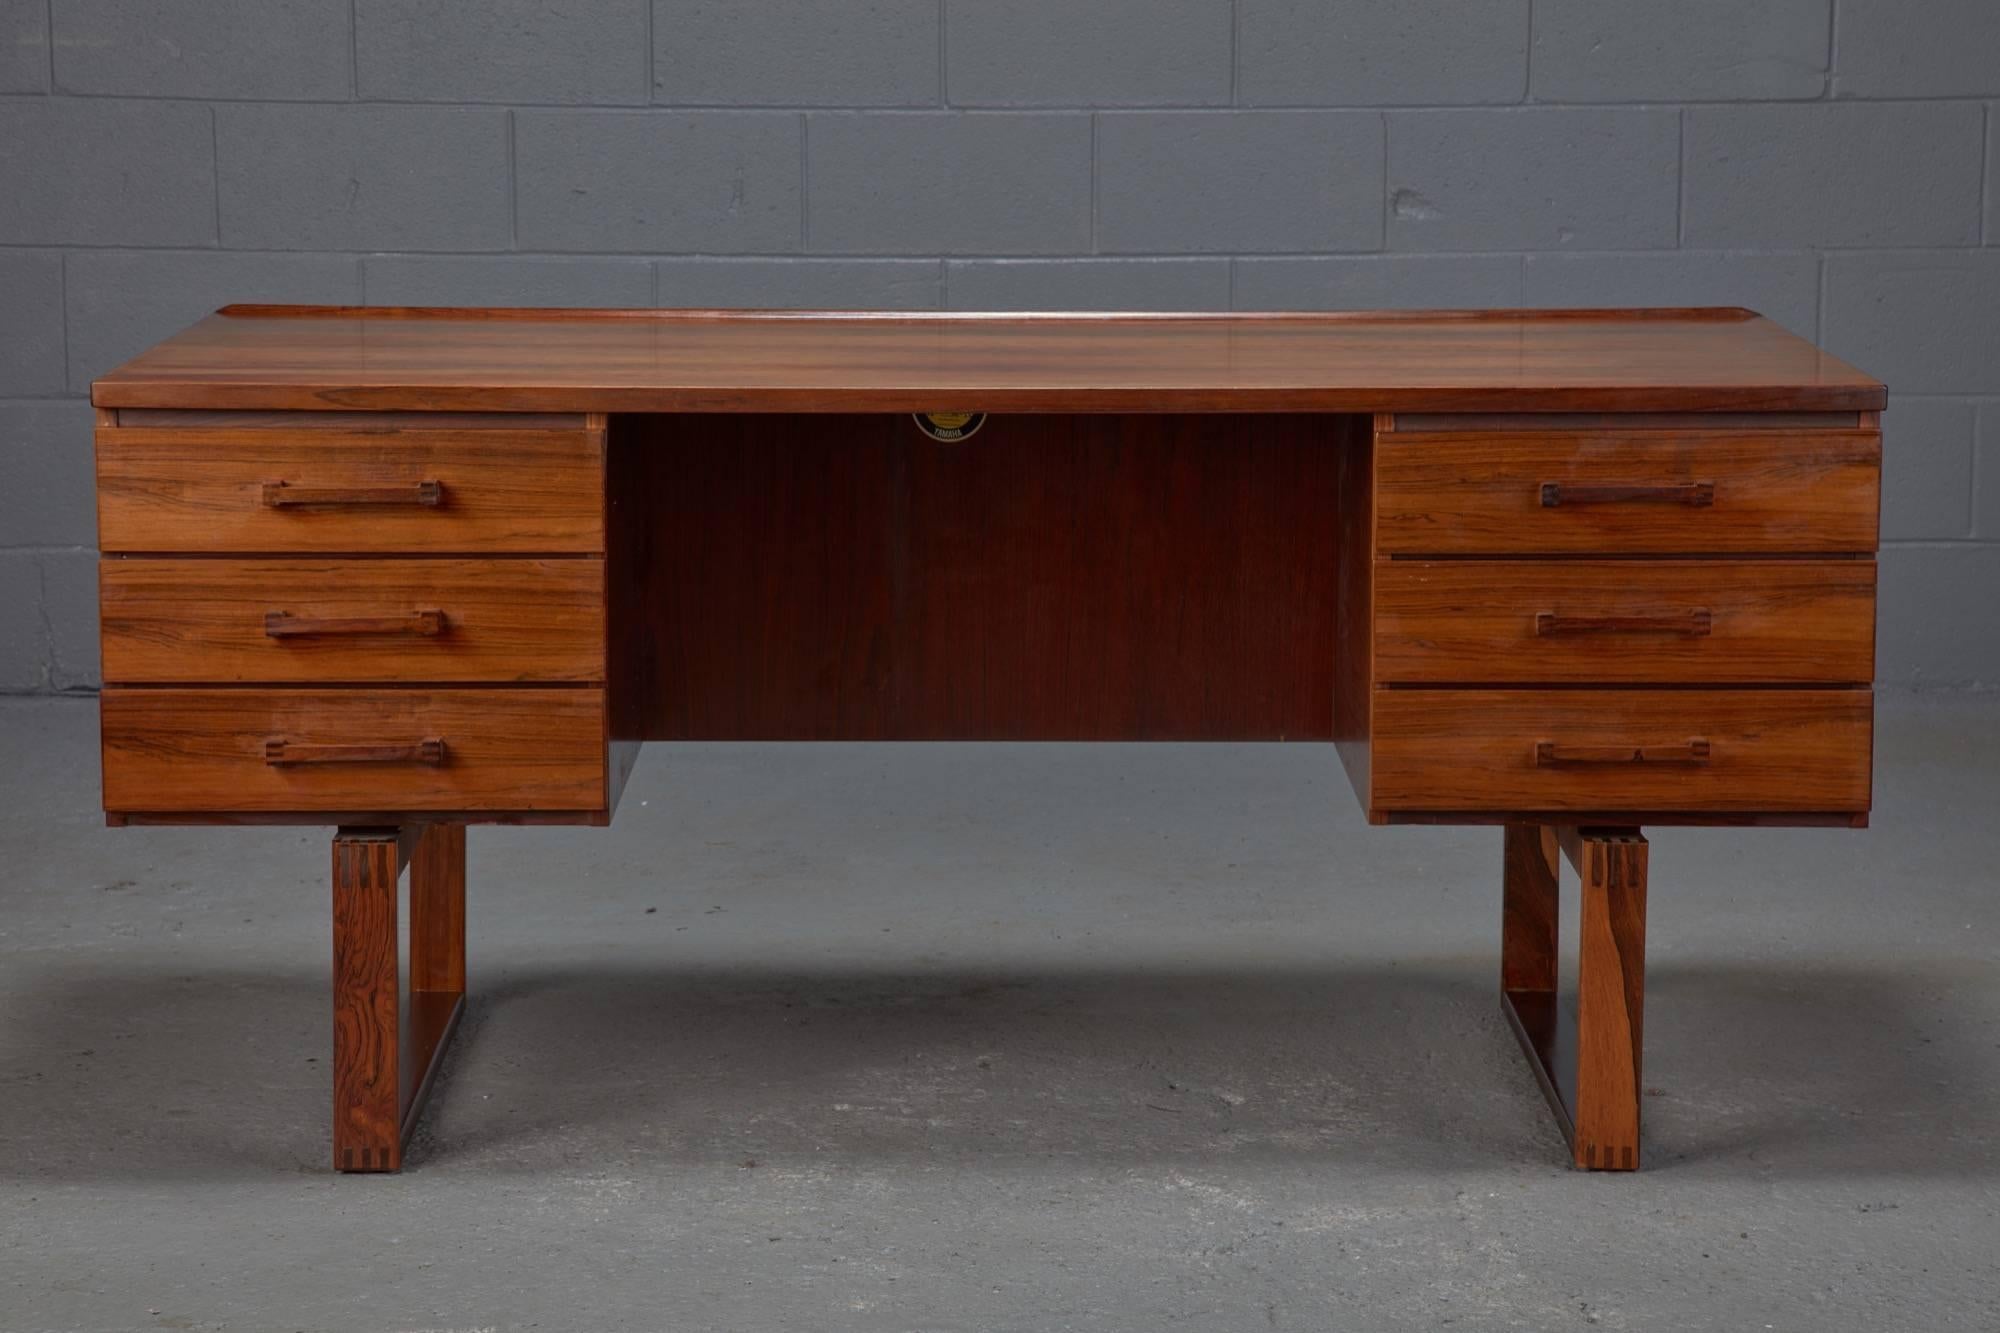 Designed in Denmark by Henning Jensen & Torben Valeur, this rosewood desk features a sled base, six drawers on the front and a storage compartment shelf at the rear.